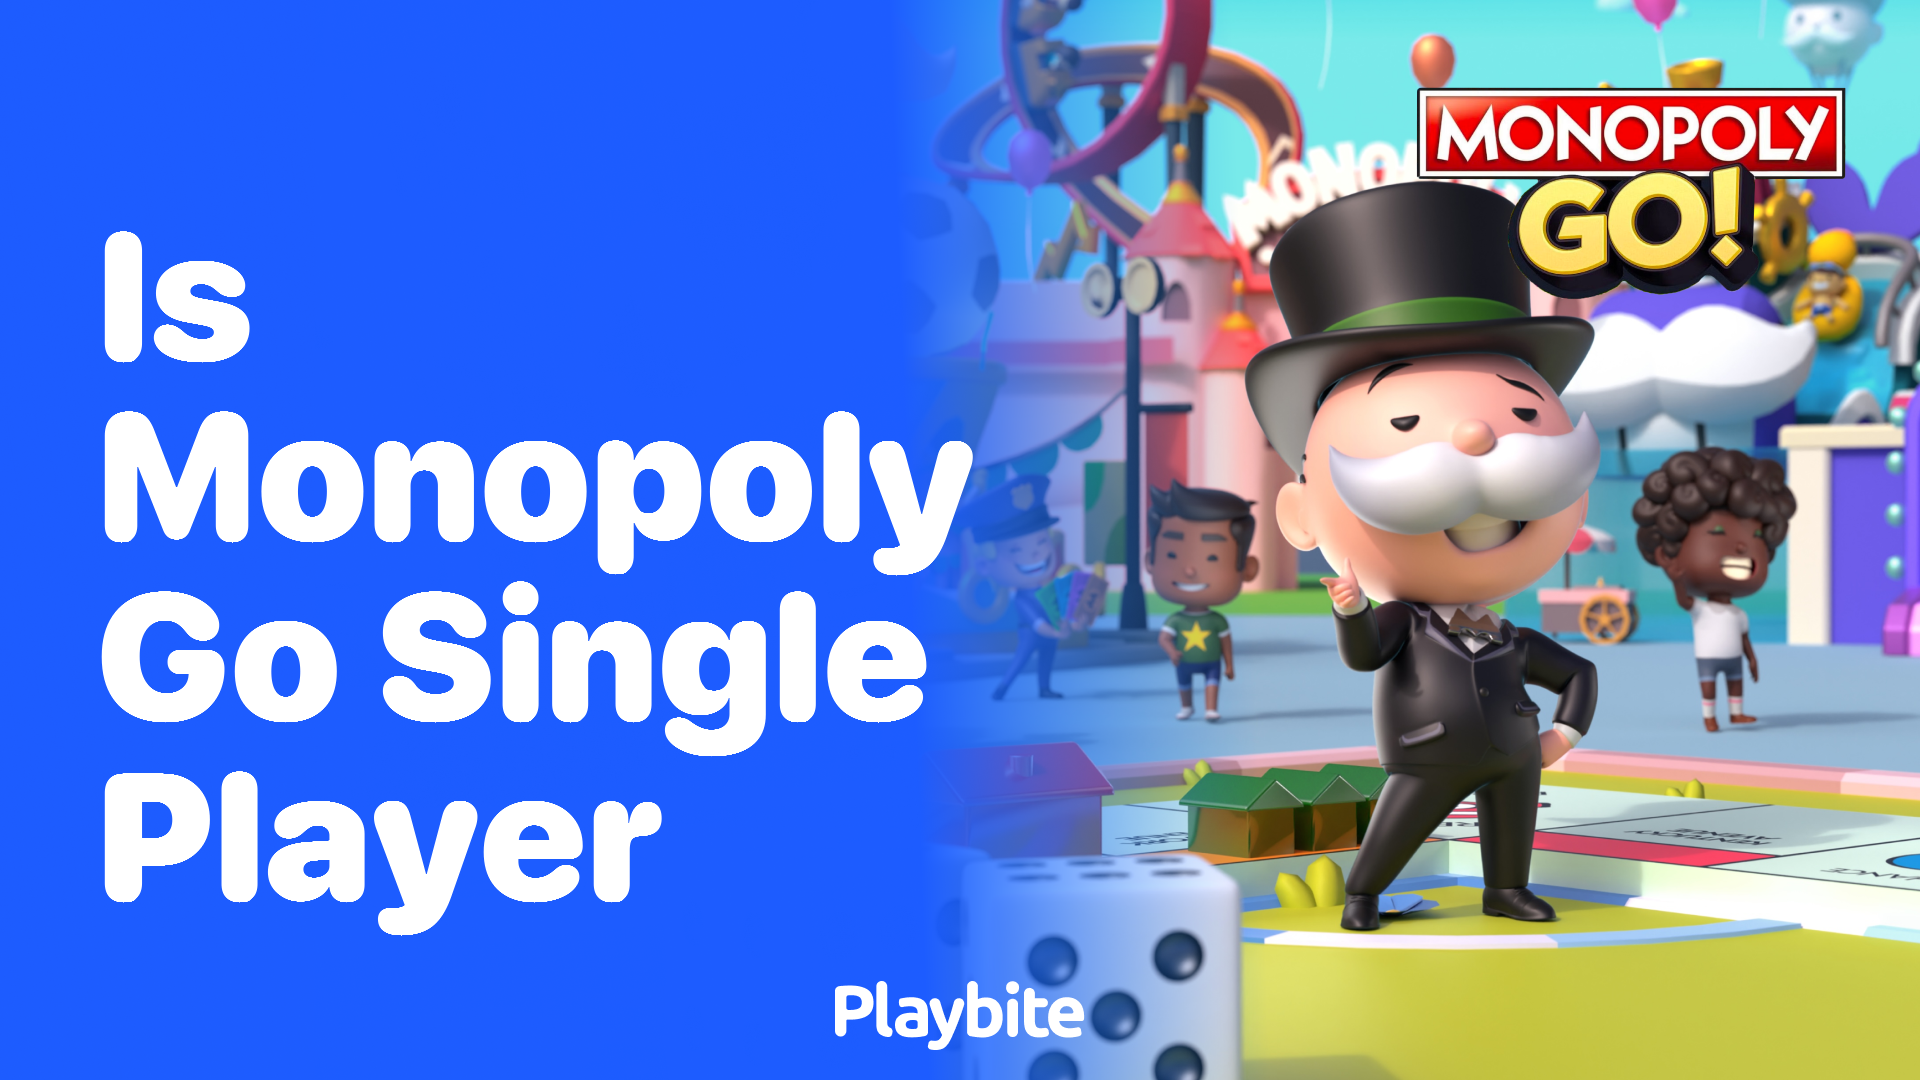 Is Monopoly Go Single Player or Can You Play with Friends?